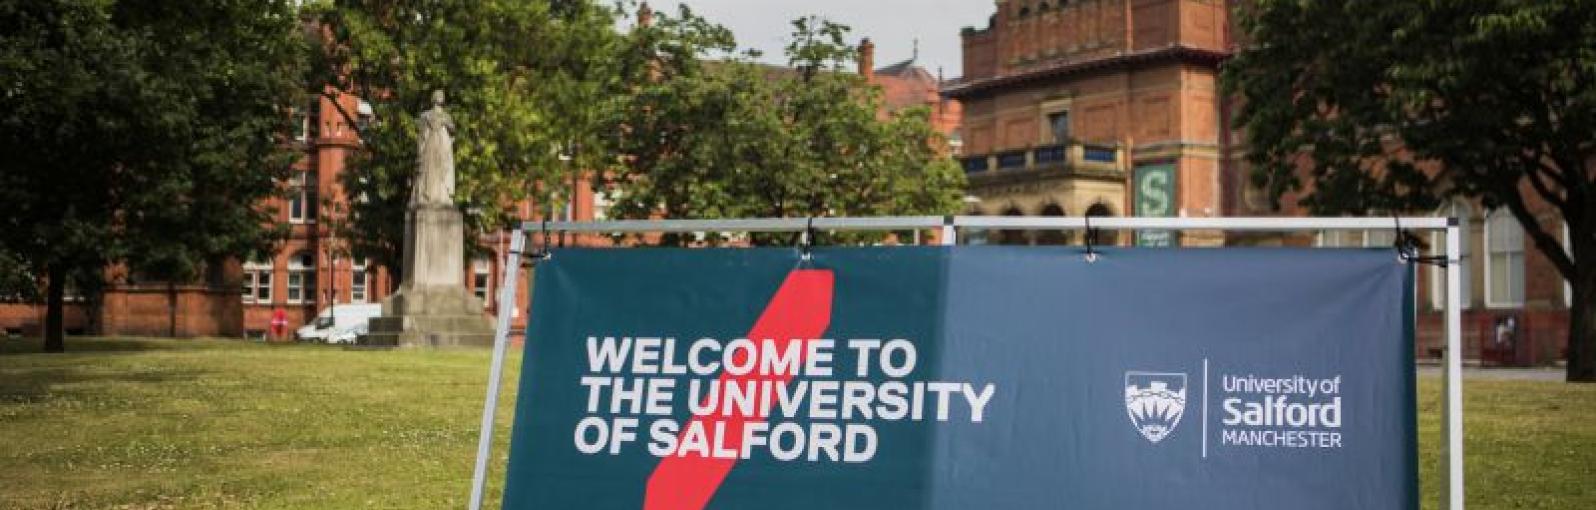 salford applicant visit day